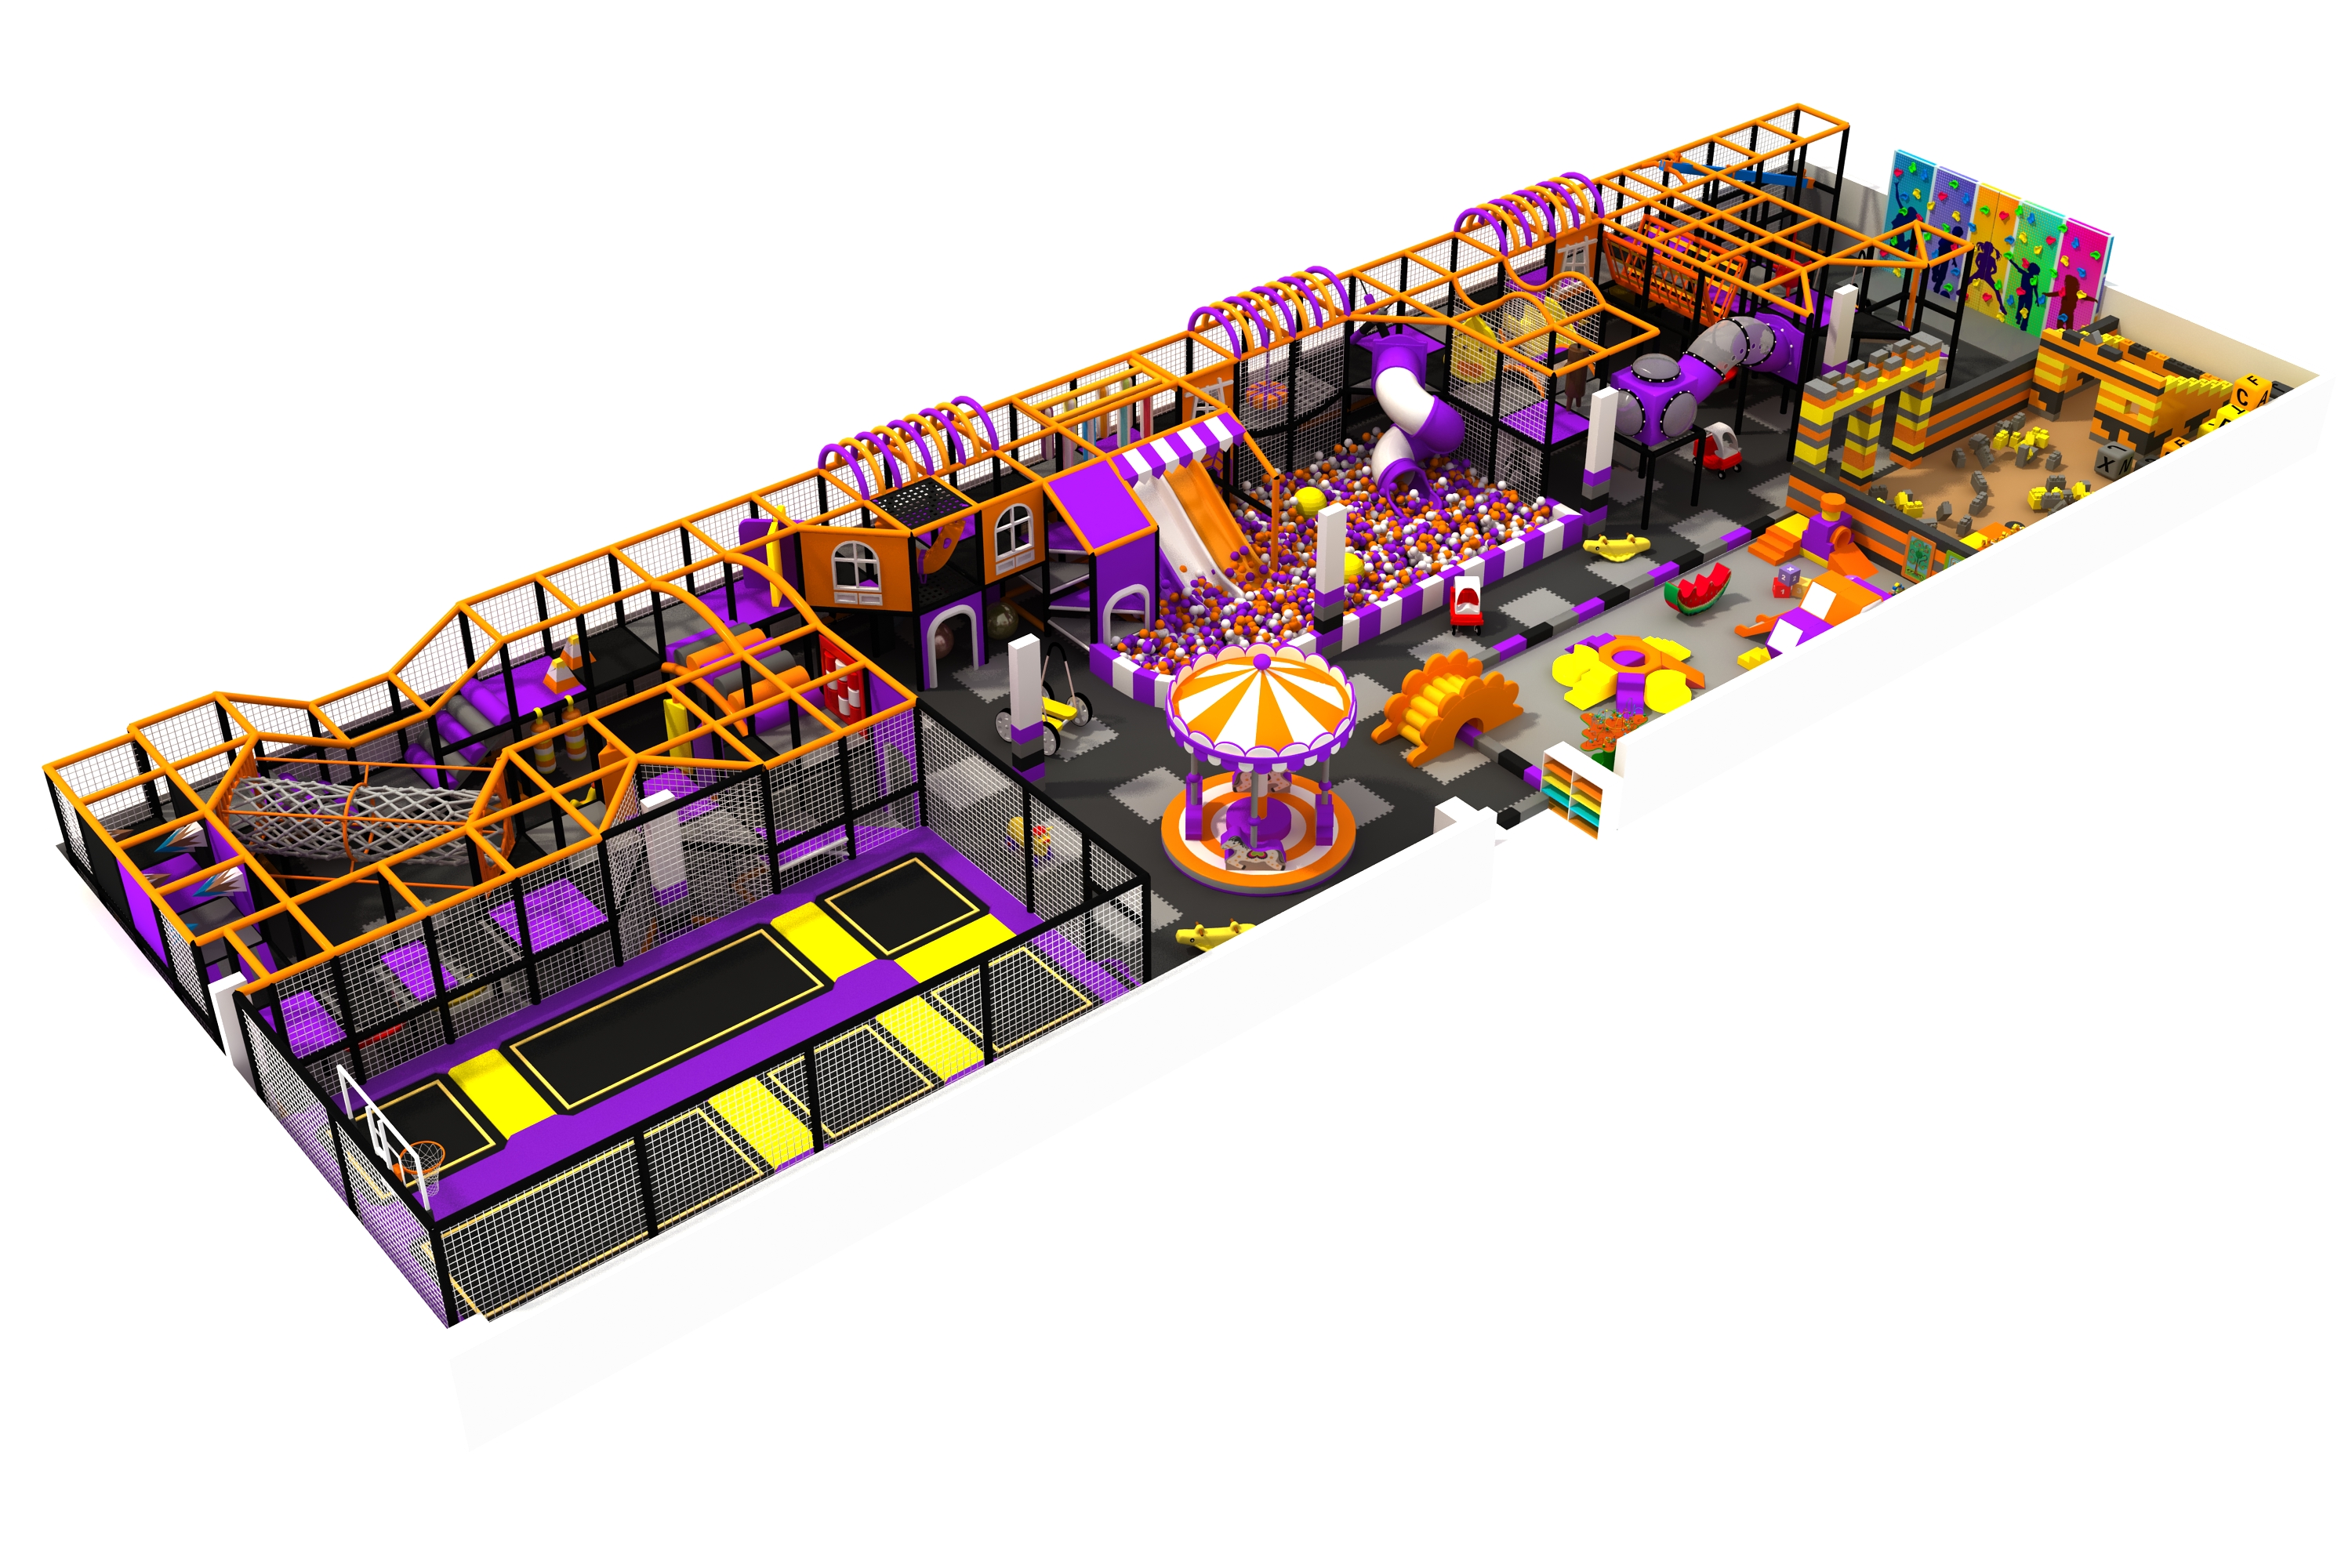 Large Space Themed Indoor Playground With Stainless Steel